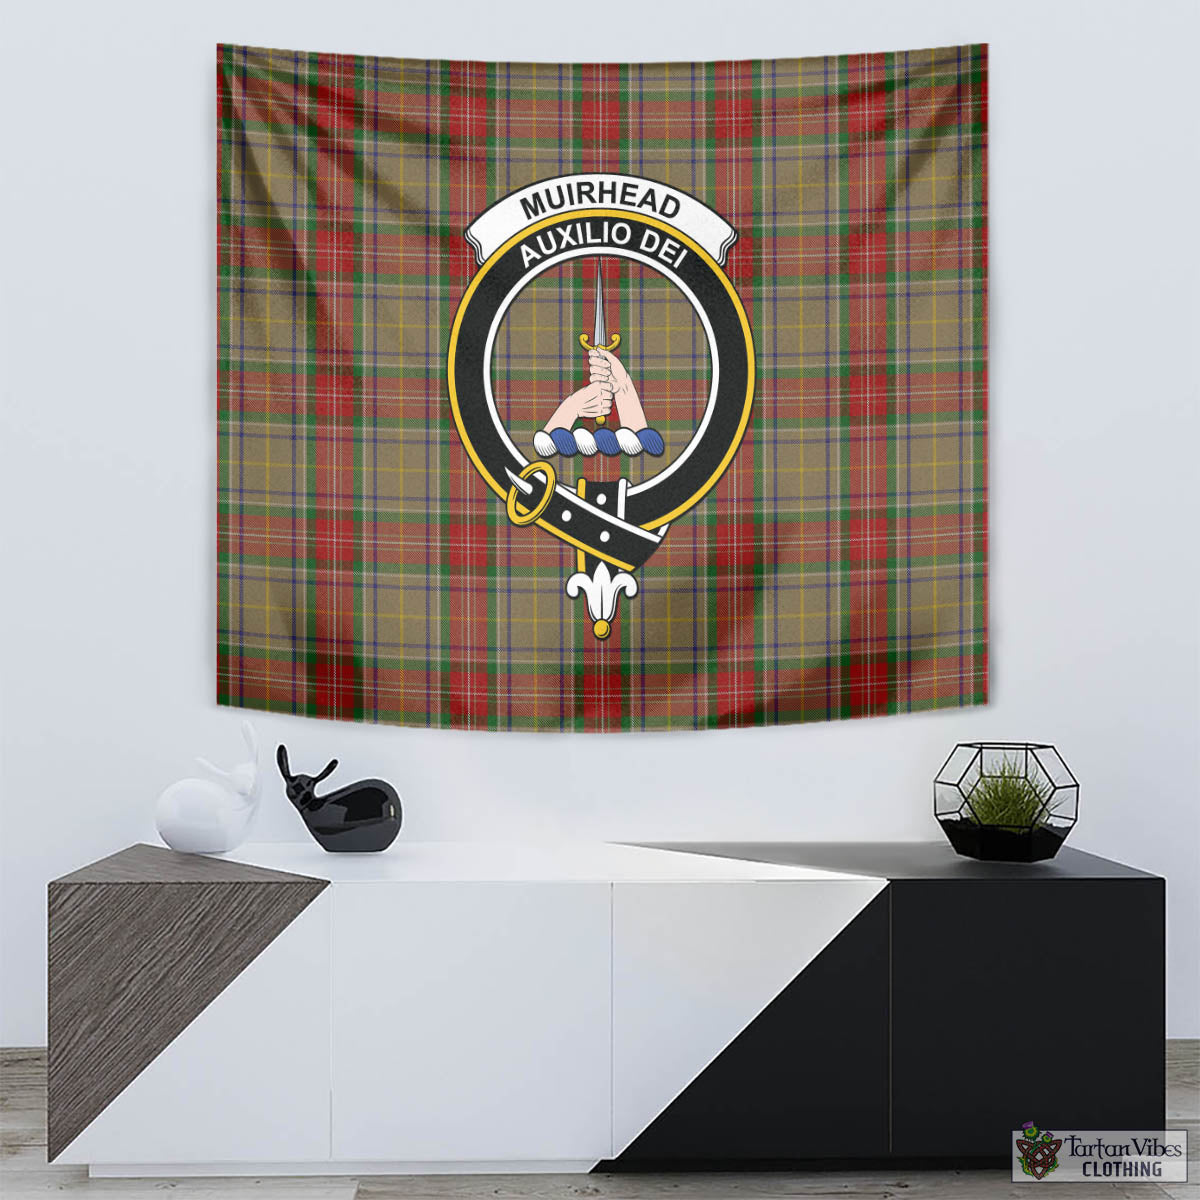 Tartan Vibes Clothing Muirhead Old Tartan Tapestry Wall Hanging and Home Decor for Room with Family Crest